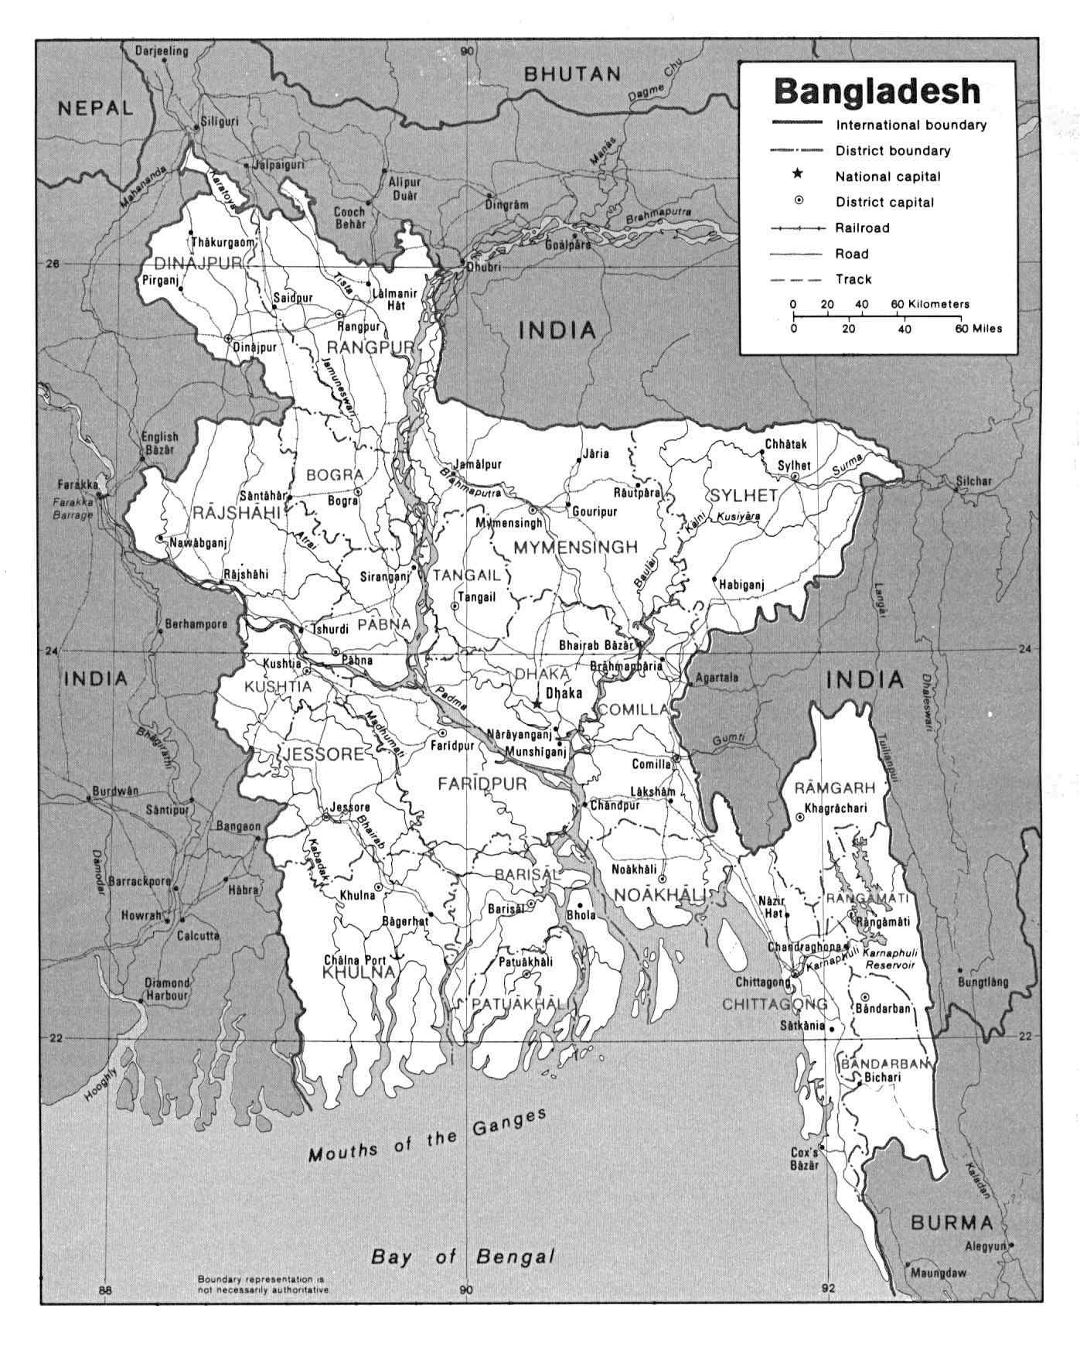 Large political and administrative map of Bangladesh with roads and major cities